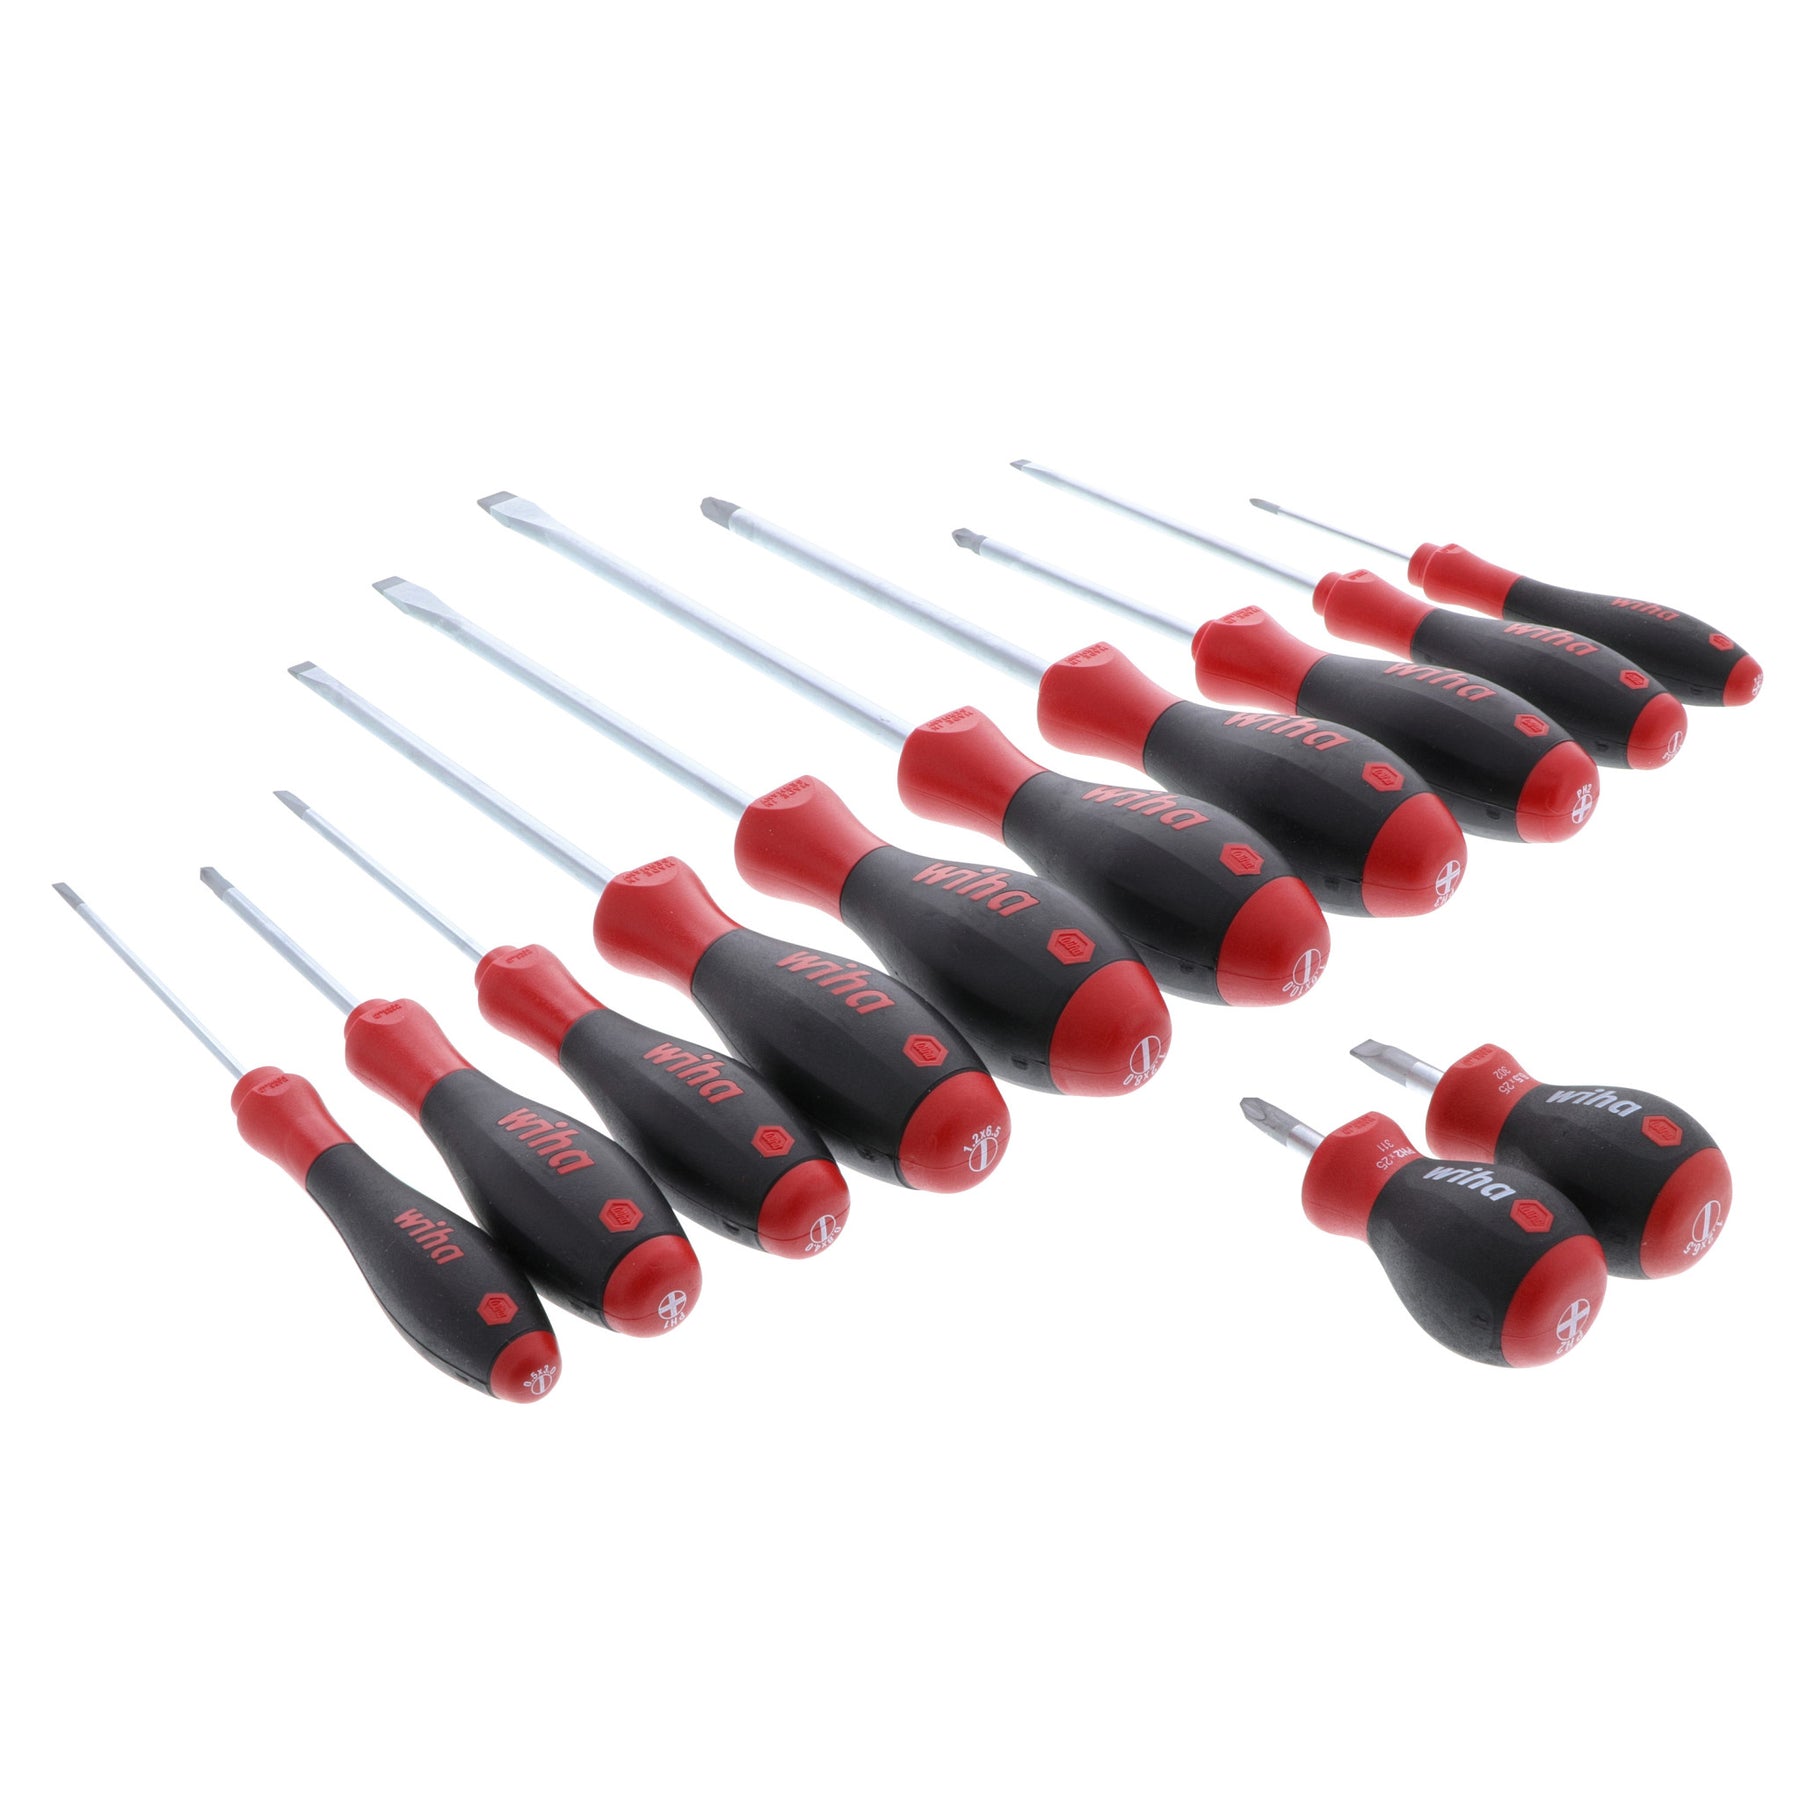 12 Piece SoftFinish Slotted and Phillips Screwdriver Set